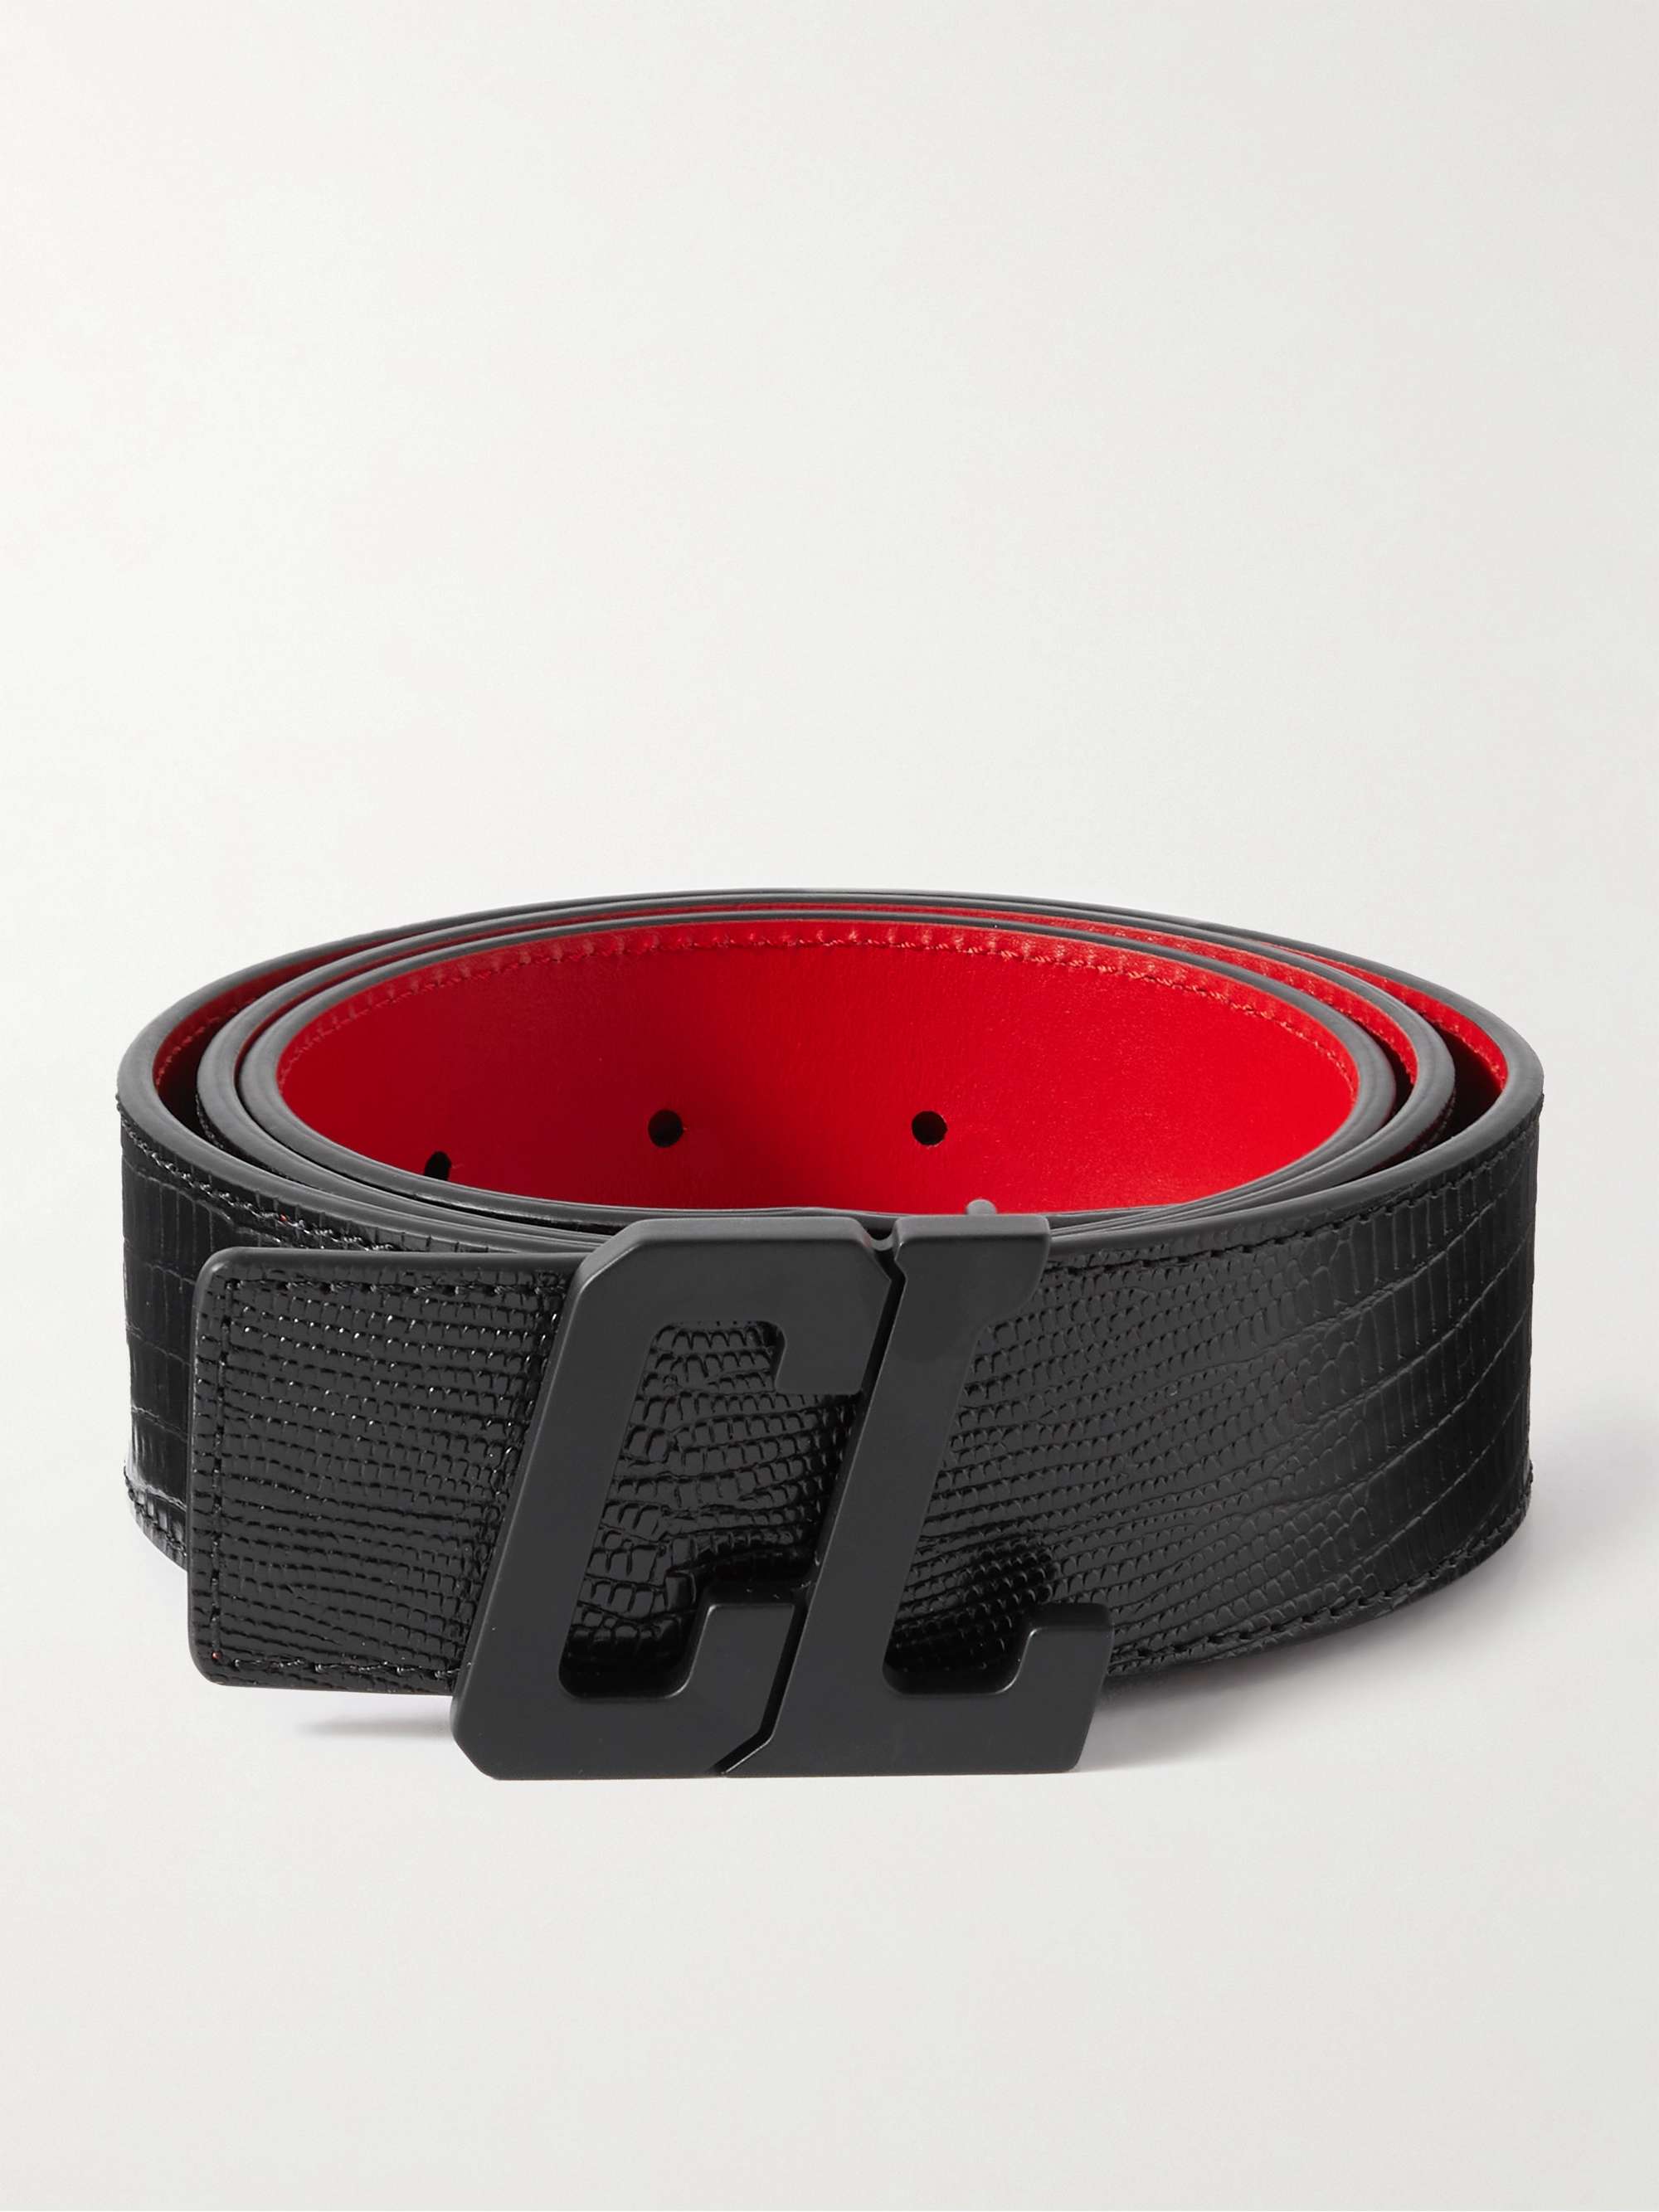 Christian Louboutin Reversible Red Black Happy Rui CL Buckle Perforated Belt  www.imisca.jp